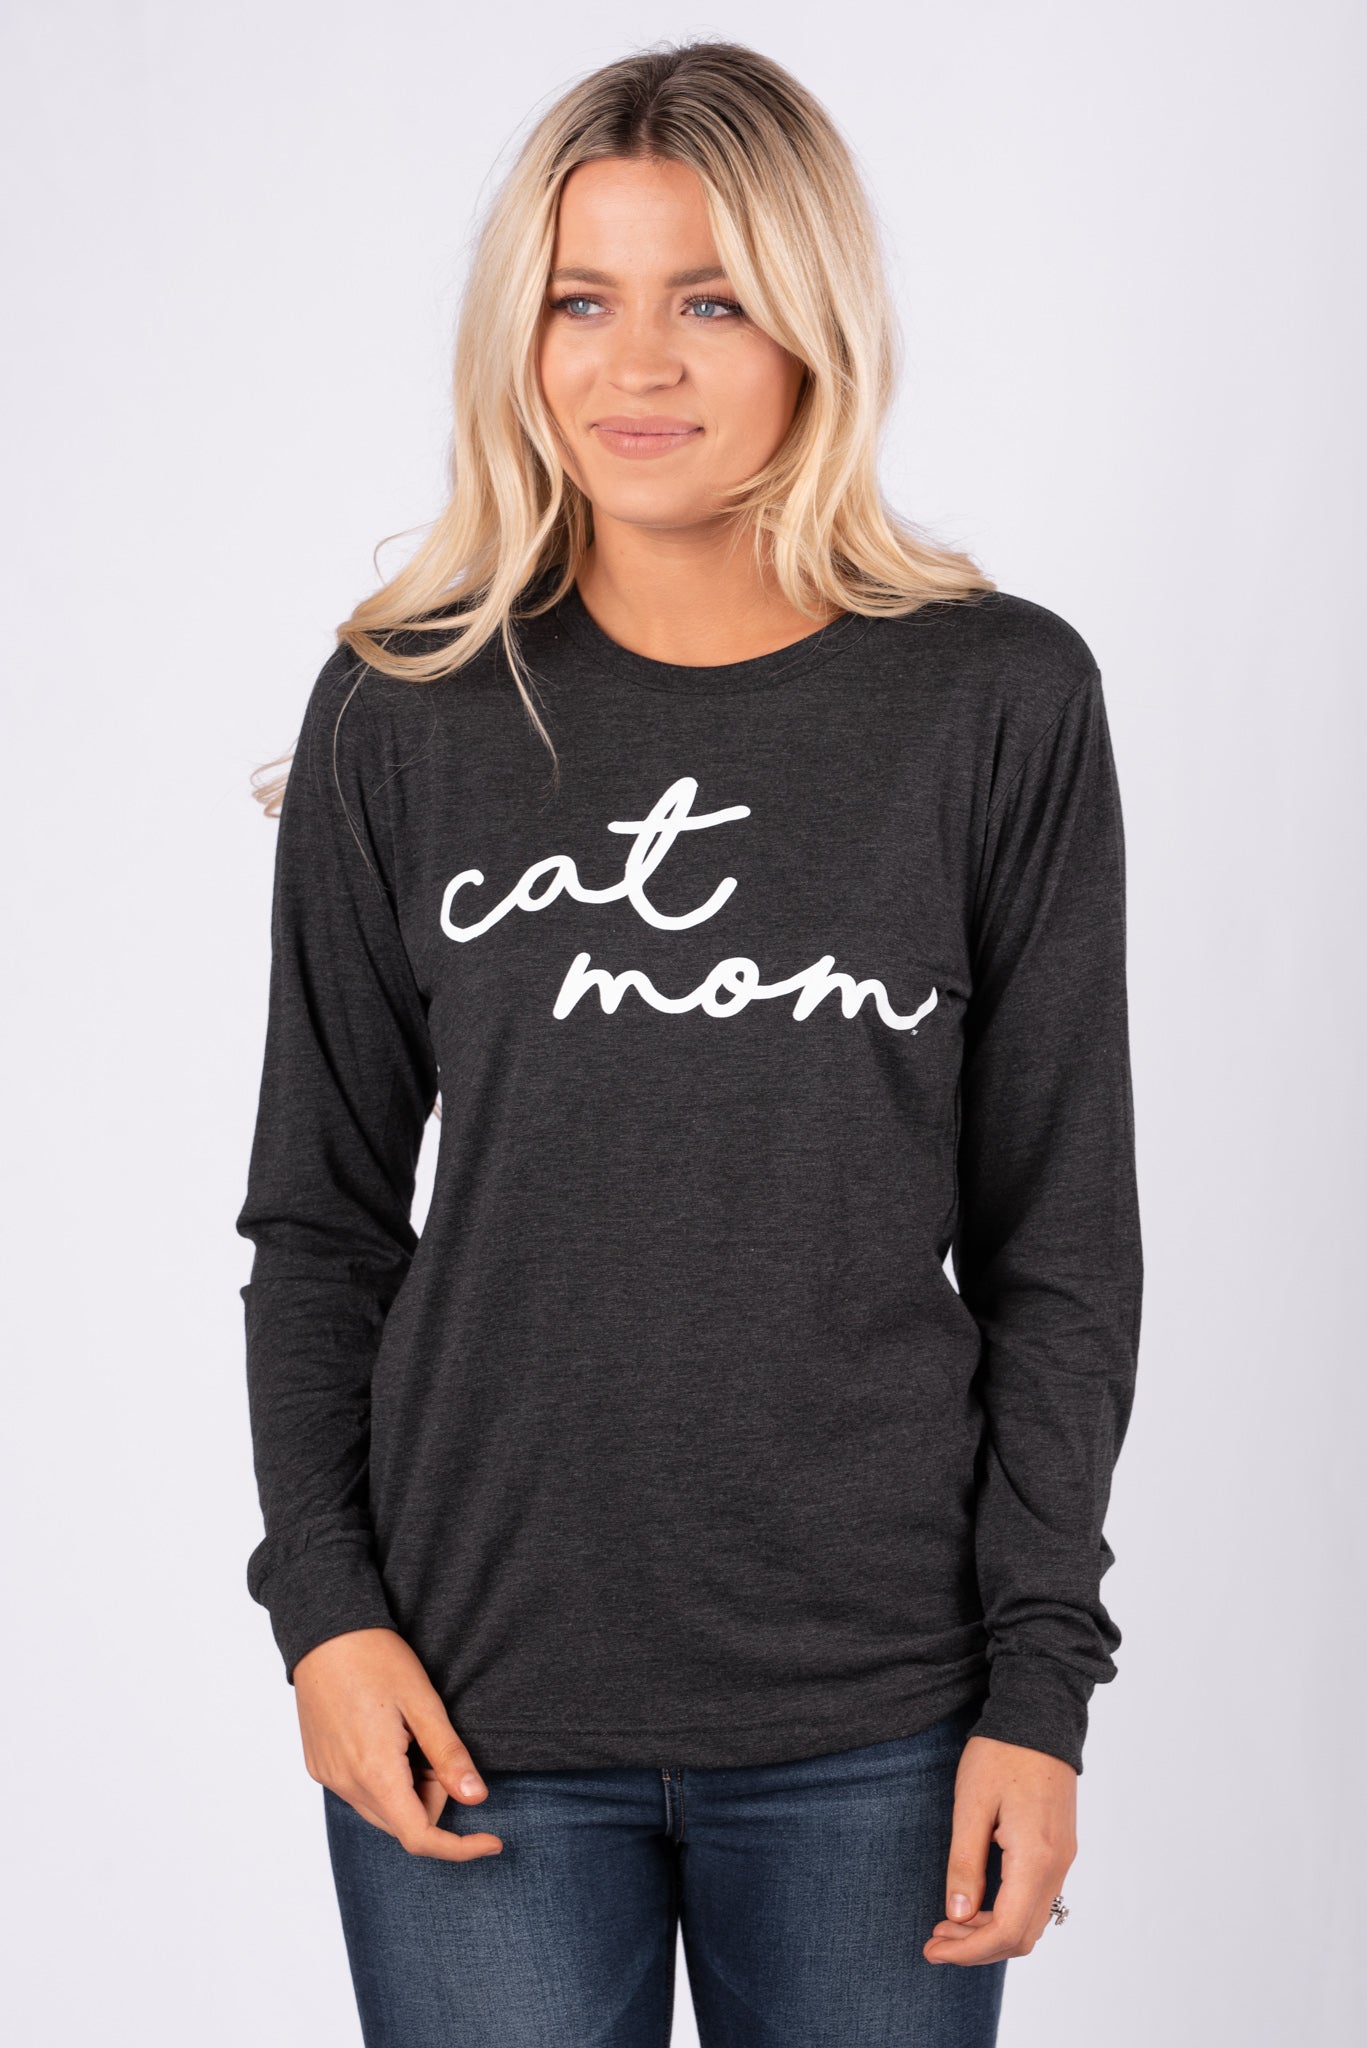 Cat Mom large pride script unisex long sleeve t-shirt charcoal - Stylish T-shirts - Trendy Graphic T-Shirts and Tank Tops at Lush Fashion Lounge Boutique in Oklahoma City